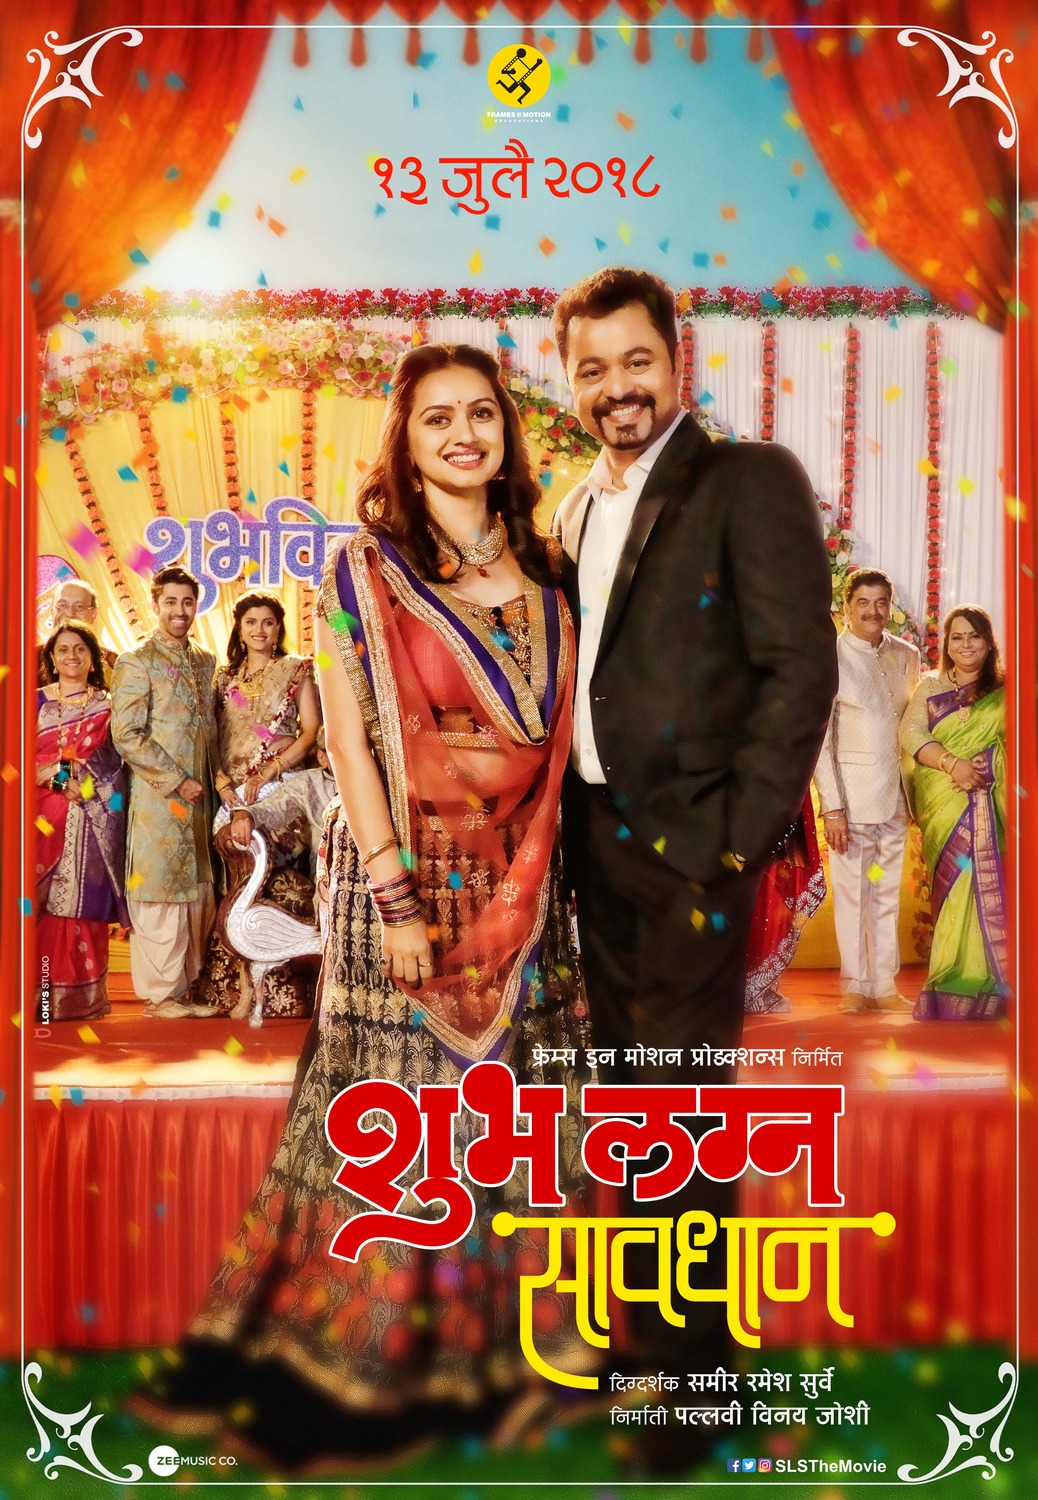 Extra Large Movie Poster Image for Shubh Lagna Savdhan (#4 of 4)